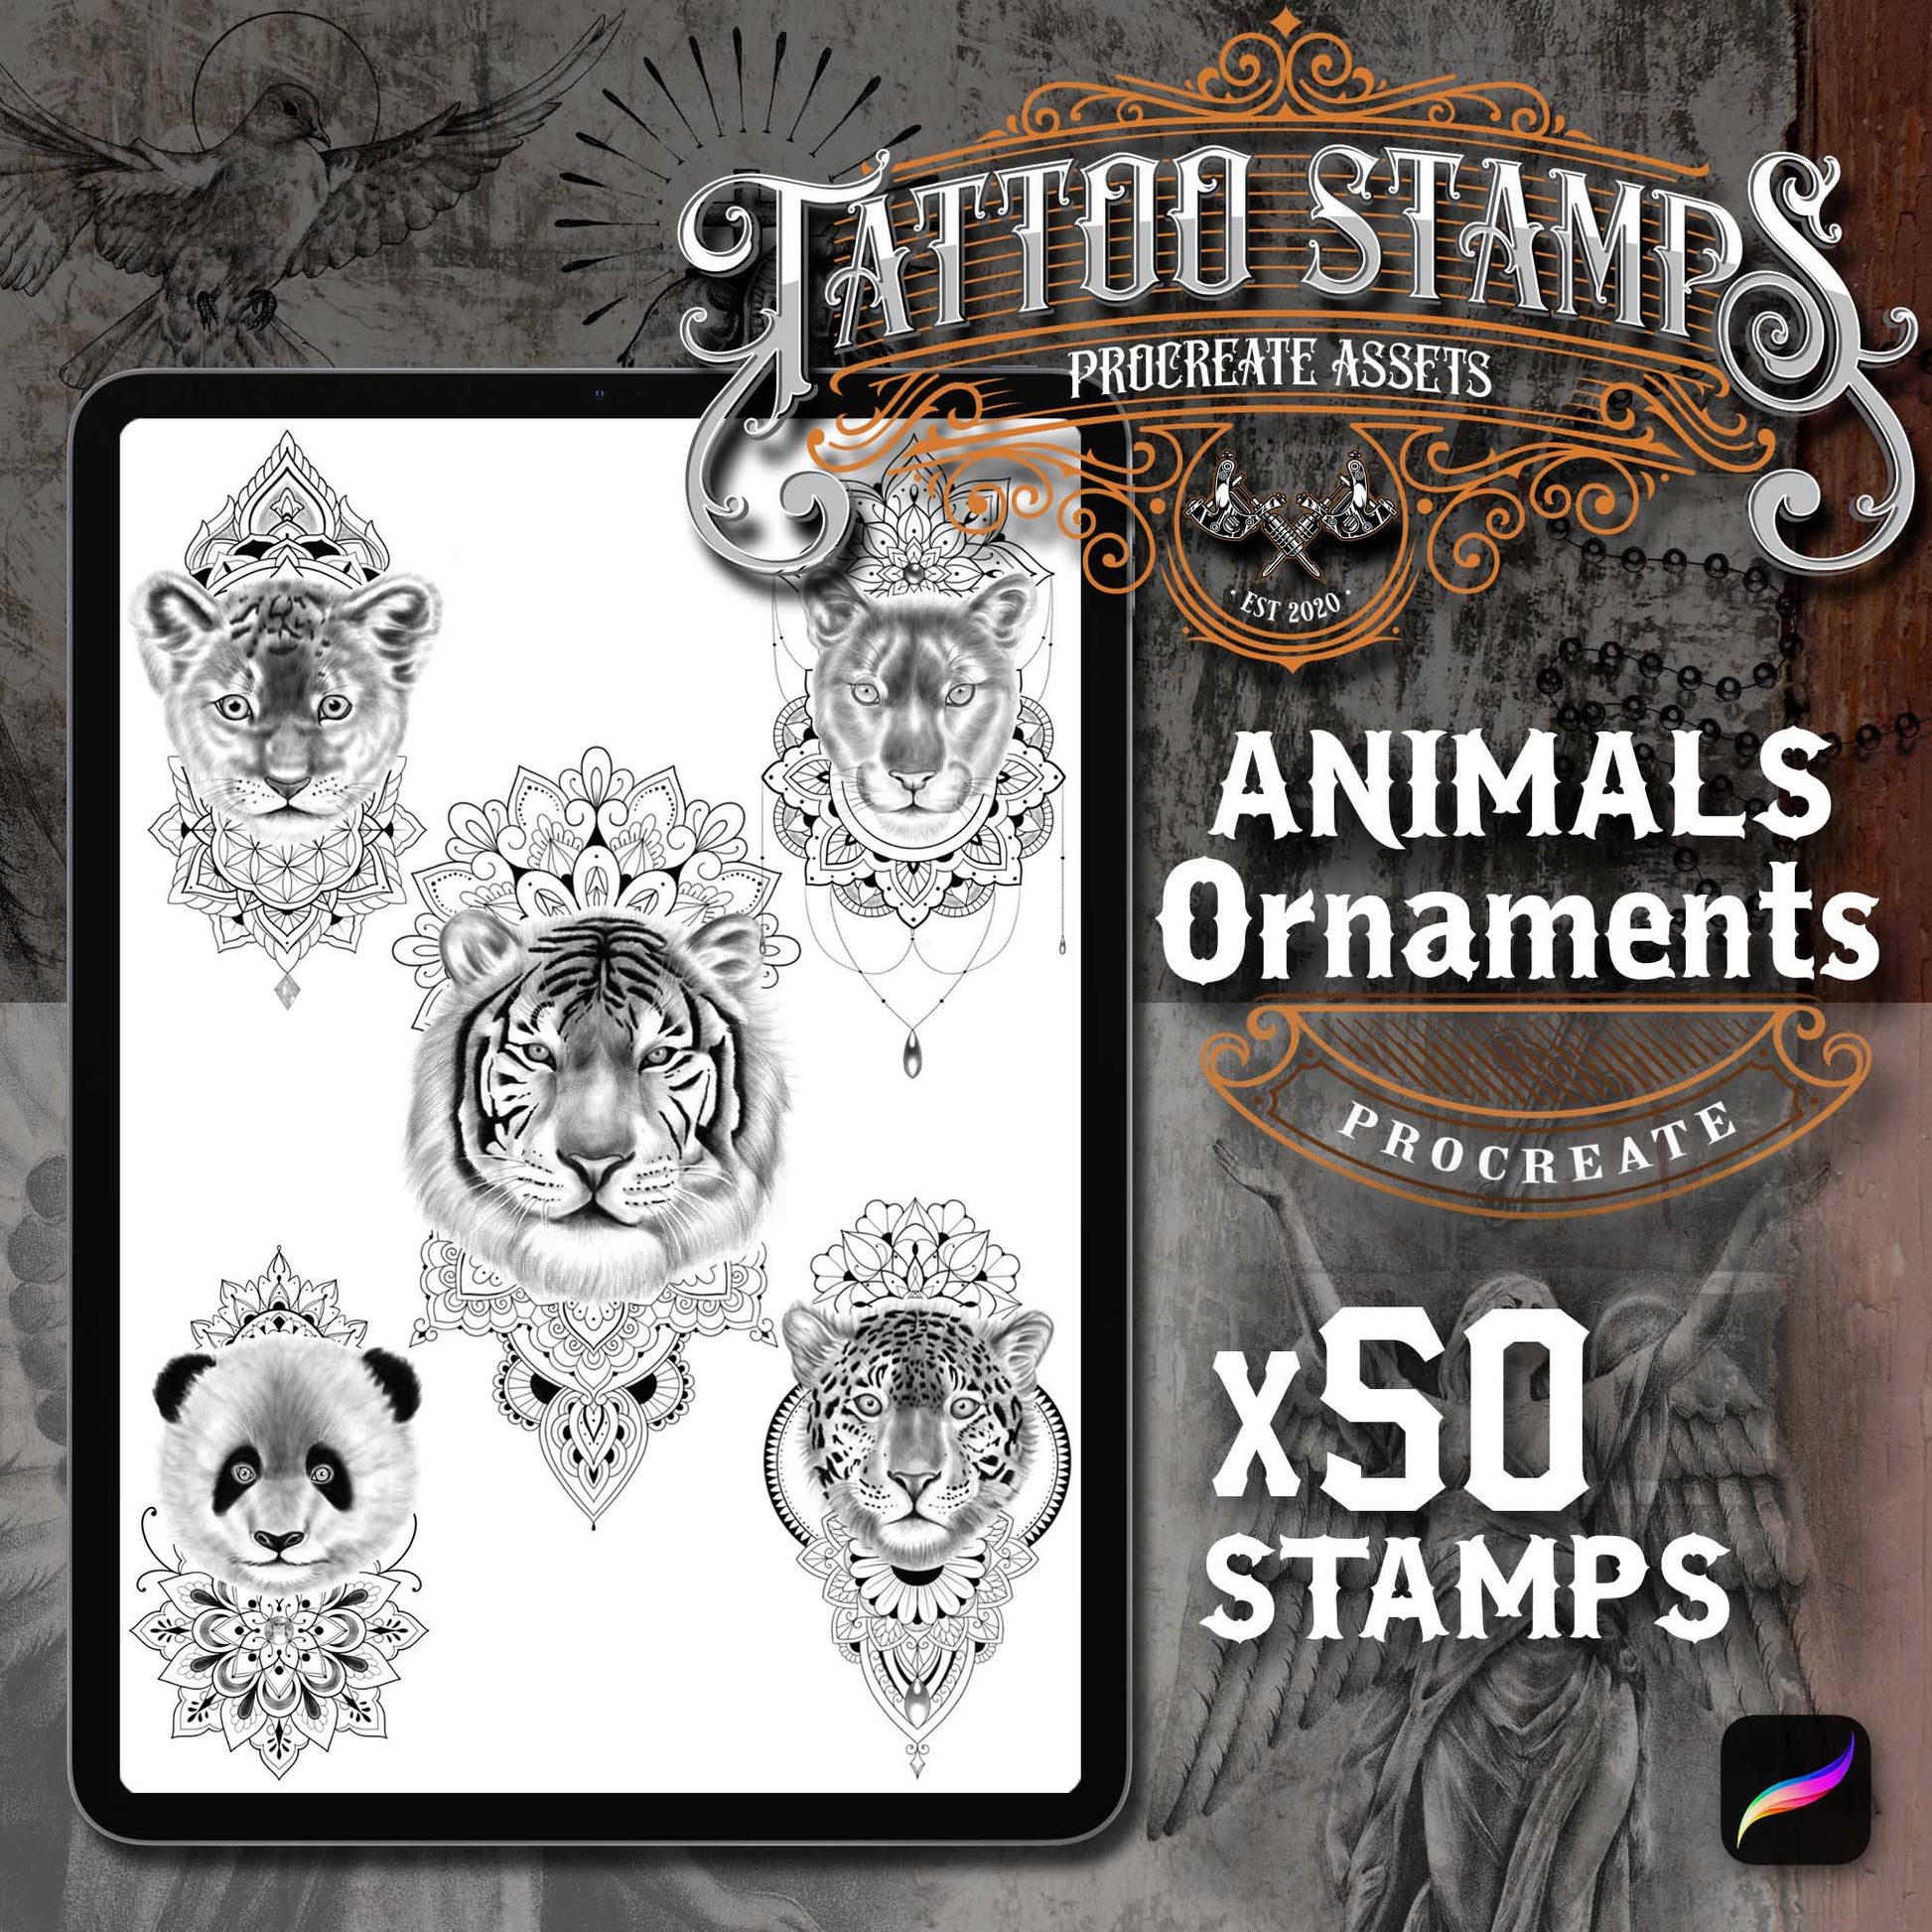 50 Realistic Birds Tattoo brushes and stamps for Procreate app iPad & iPad Pro by TattooStamps